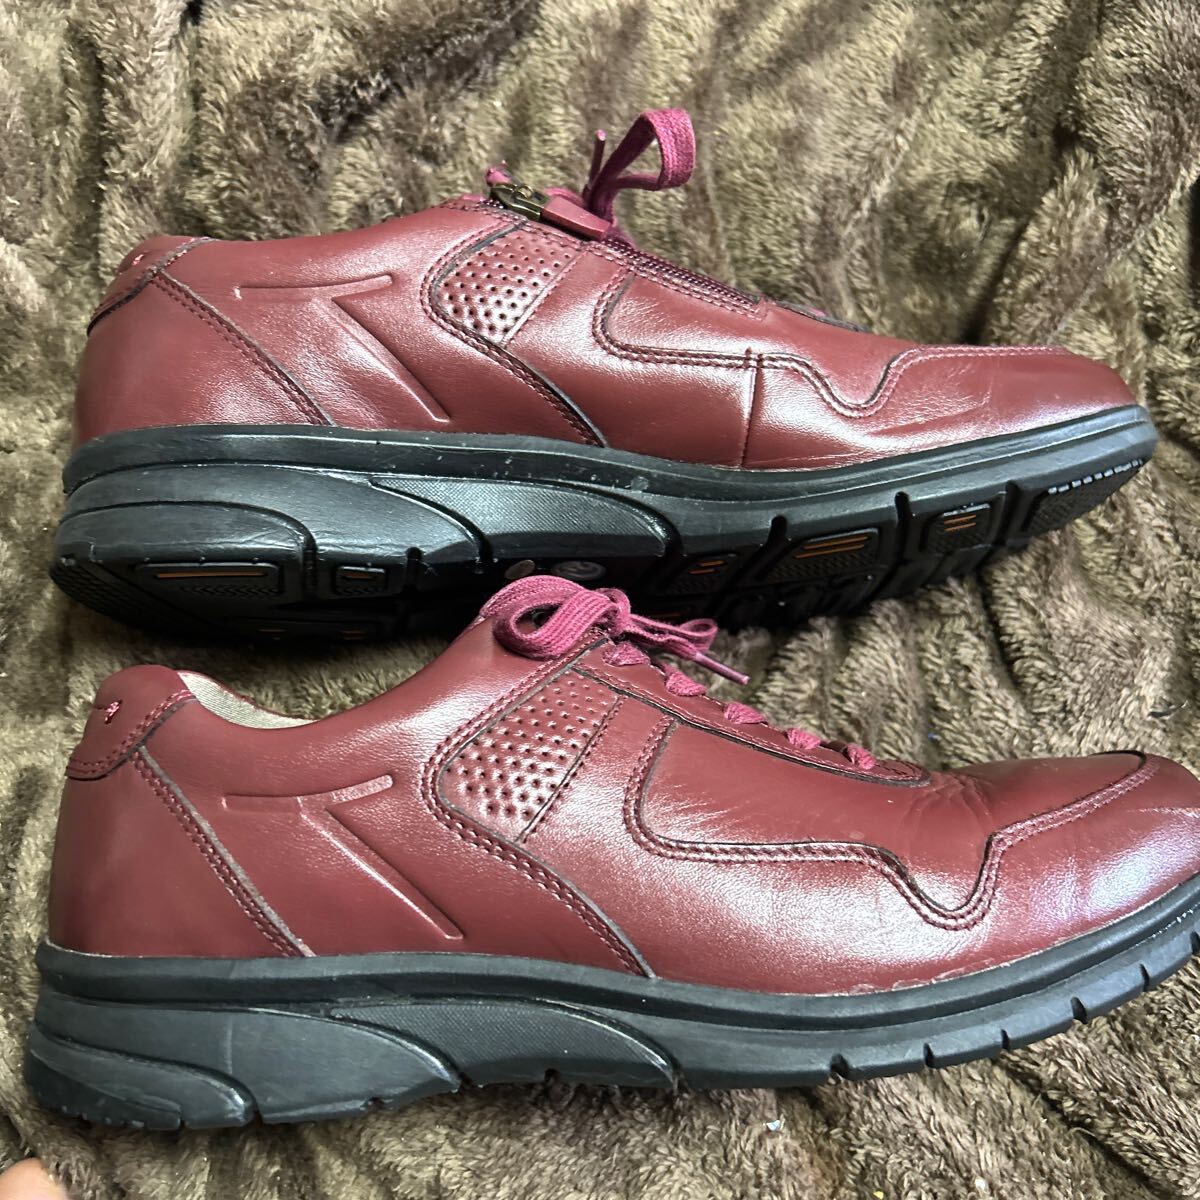  ultimate beautiful goods!1 times only have on Reagal War car natural leather walking shoes walk -stroke ride 3D foam 25.EEE regular price 31900 jpy postage 520 jpy 